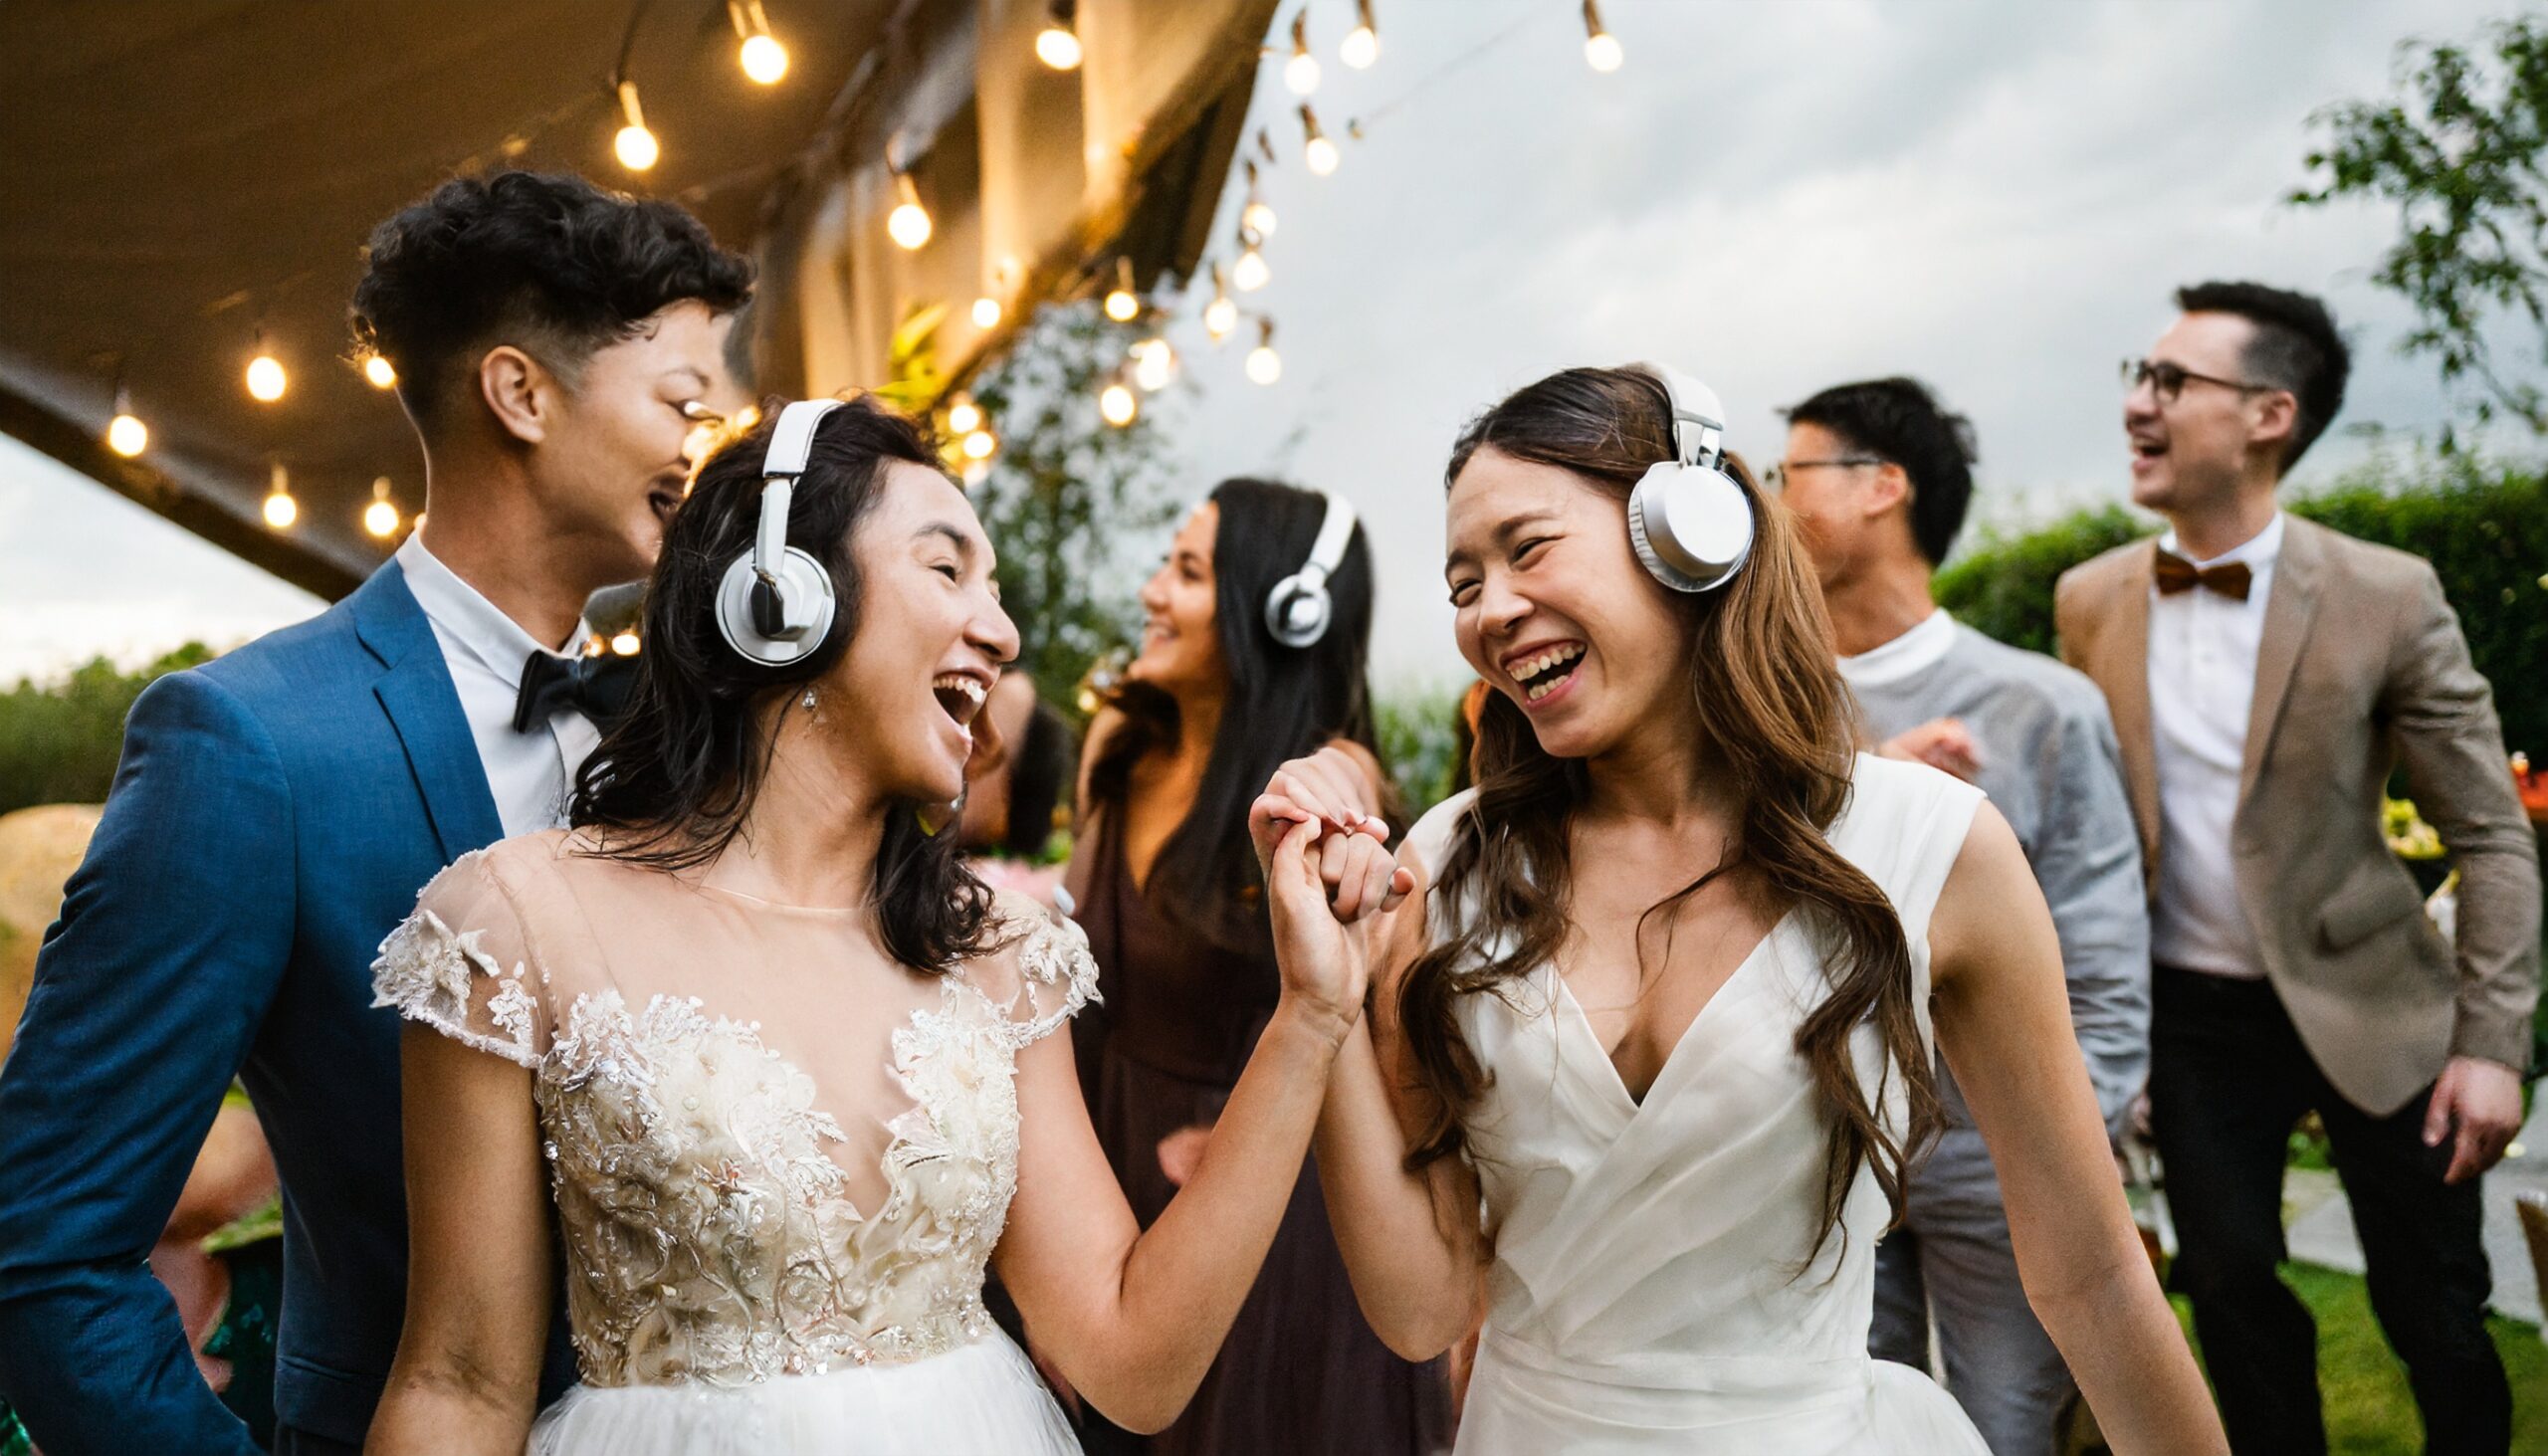 Firefly club party at a wedding. The guests are having fun and they are wearing glowing headphones. (3)